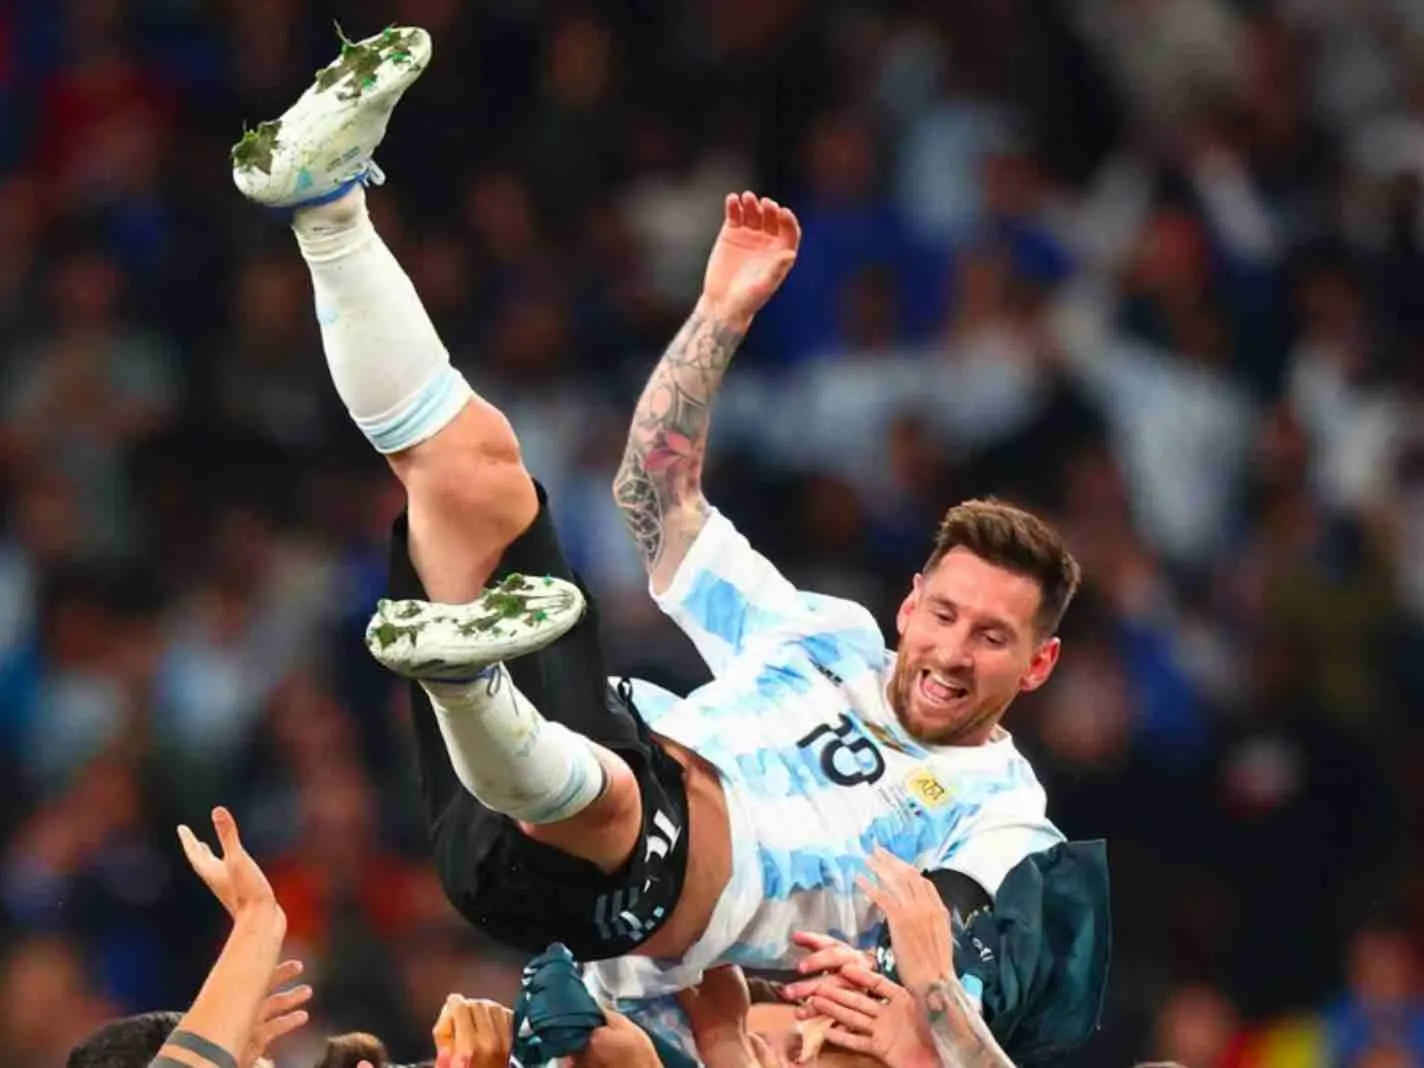 Lionel Messi hoisted up in the air by Argentina players after Finalissima victory.